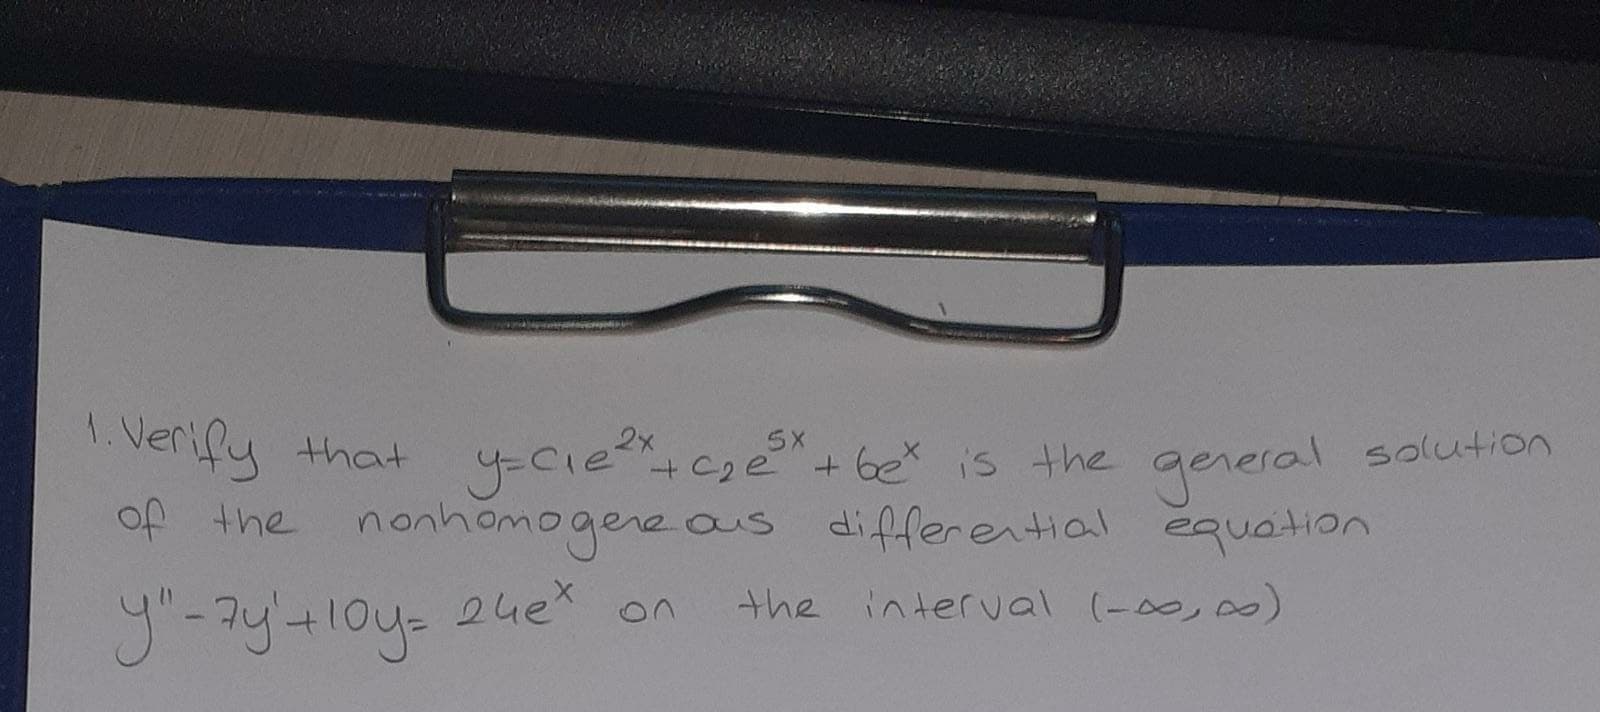 1. Verify that y-ciece
of the nonhomogenec
"
as differential equation
5X
+ be is the general solution
y"-ay'aloy-
2uex
the interval (-00,00)
